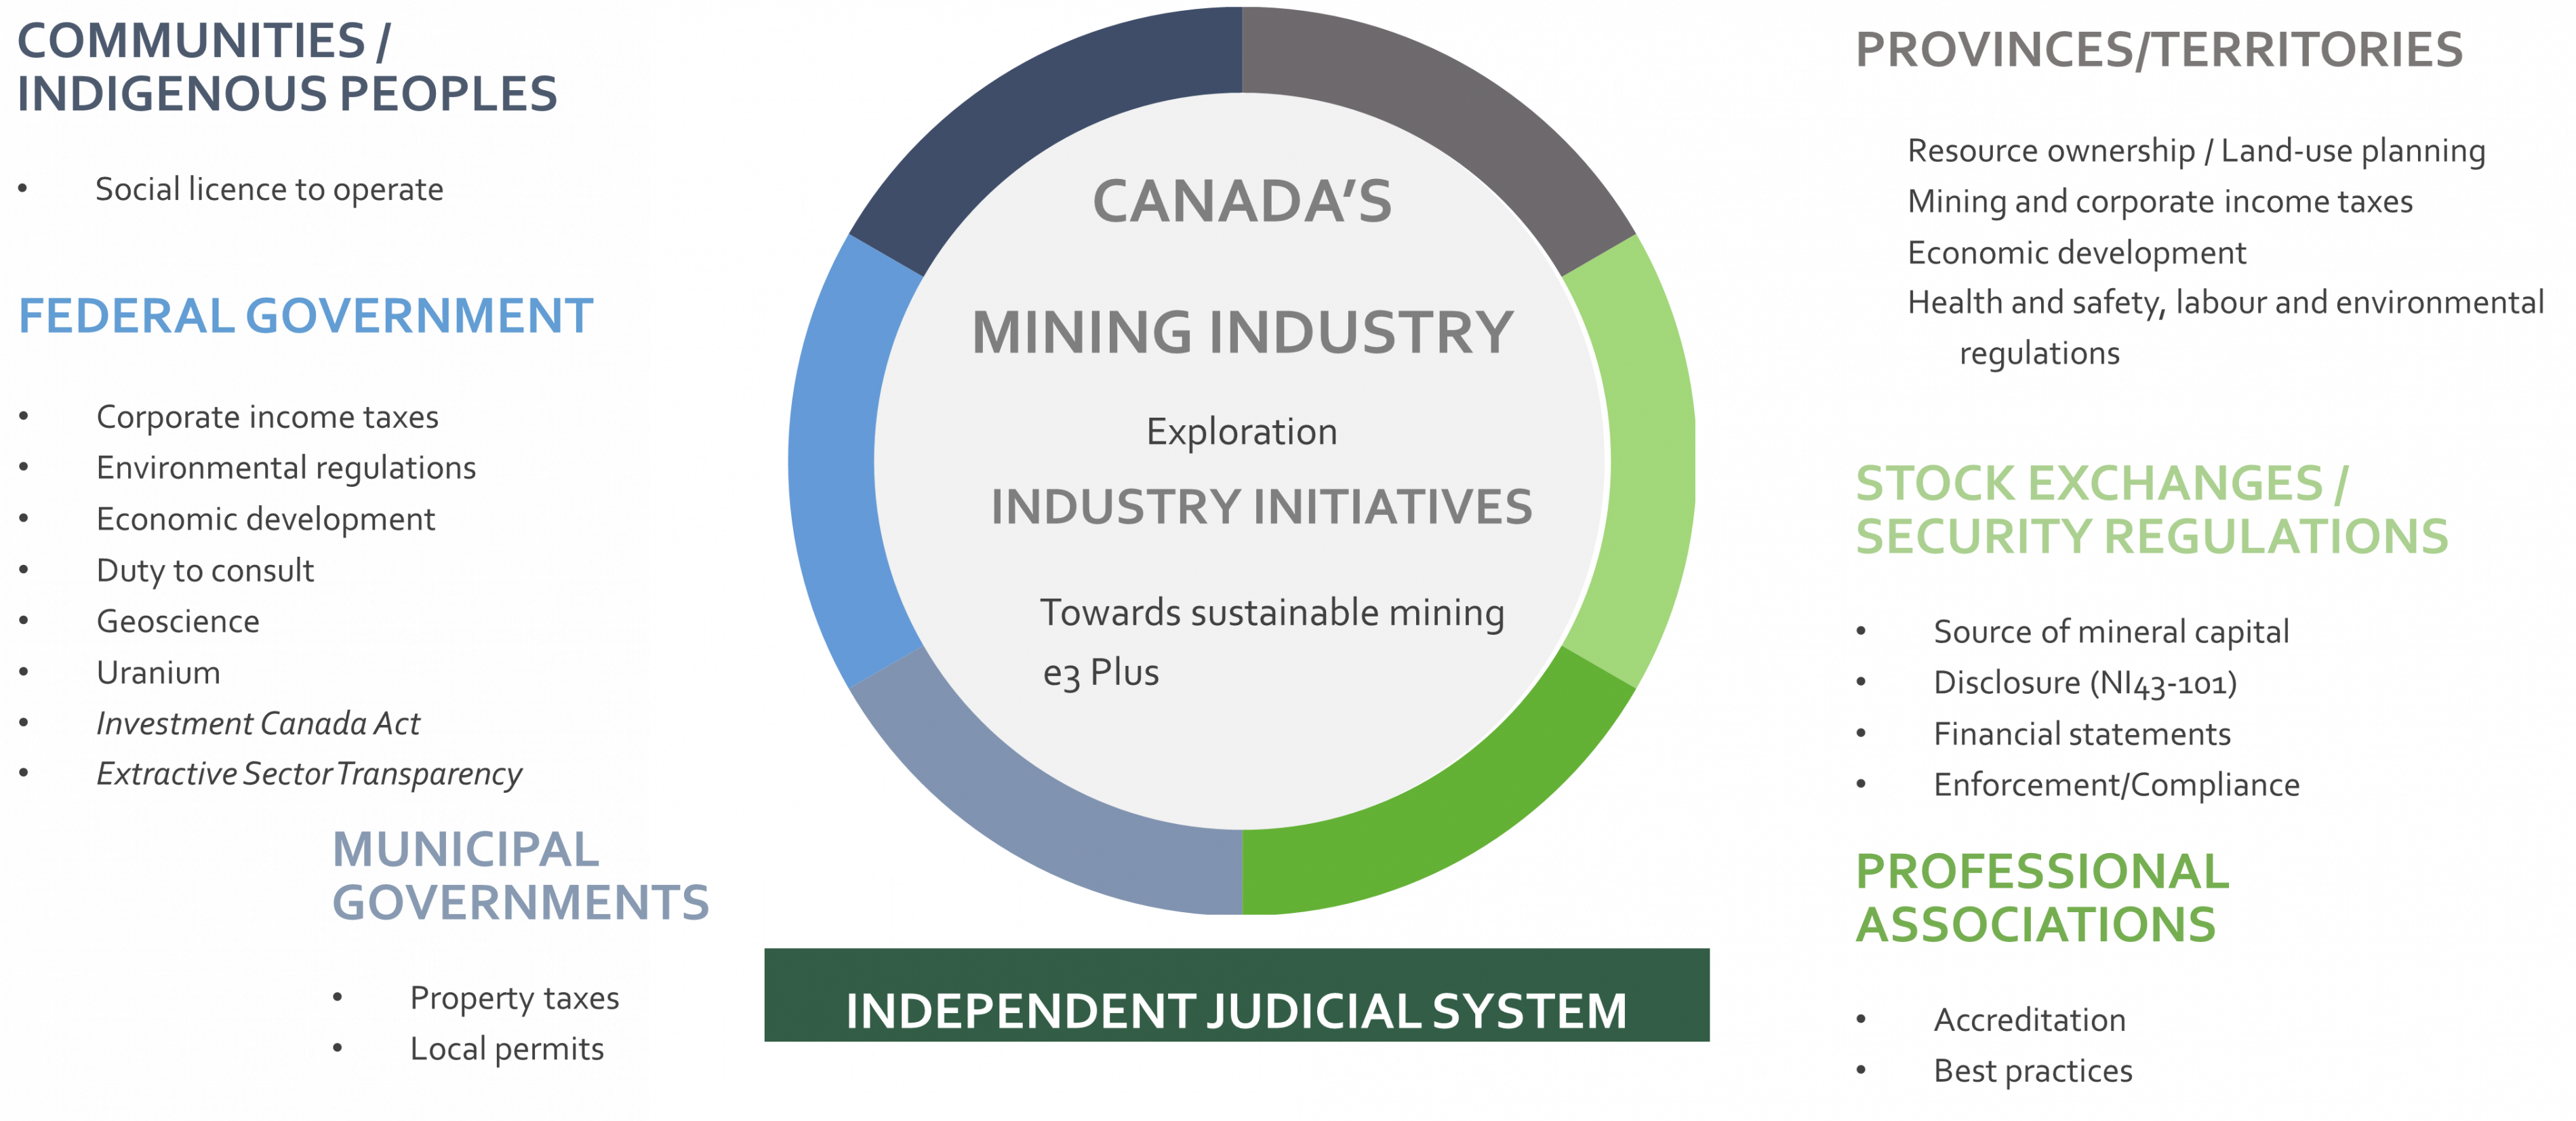 Cobalt Mining and mineral resource development in Canada